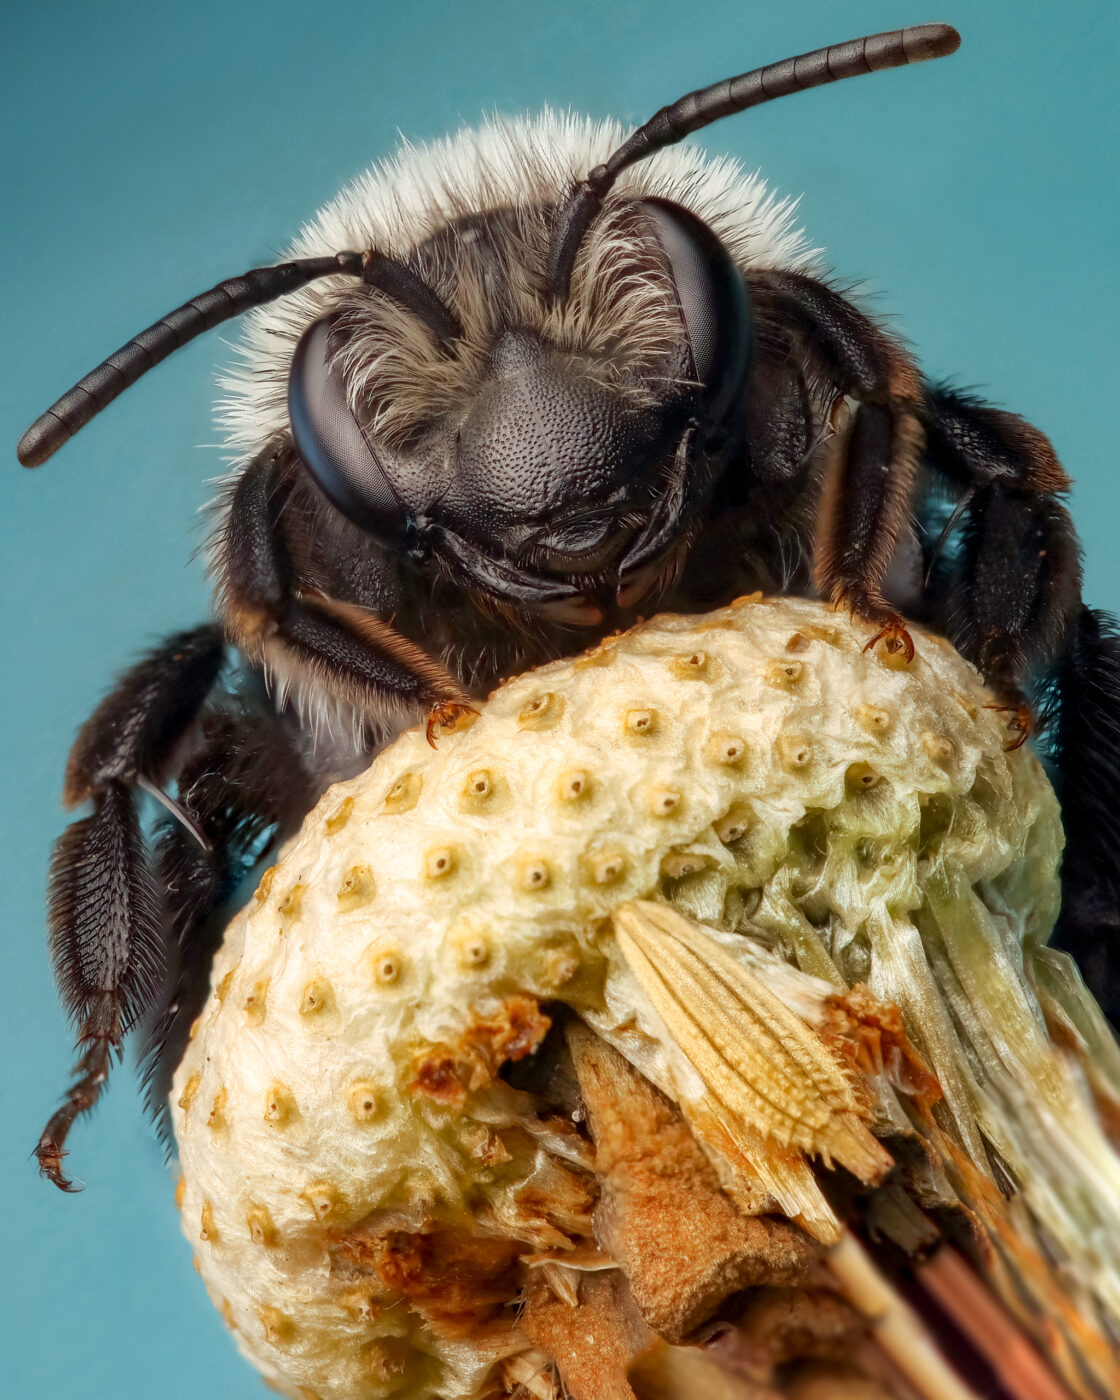 Ashy mining bee on an old dandelion head. Stacked image.